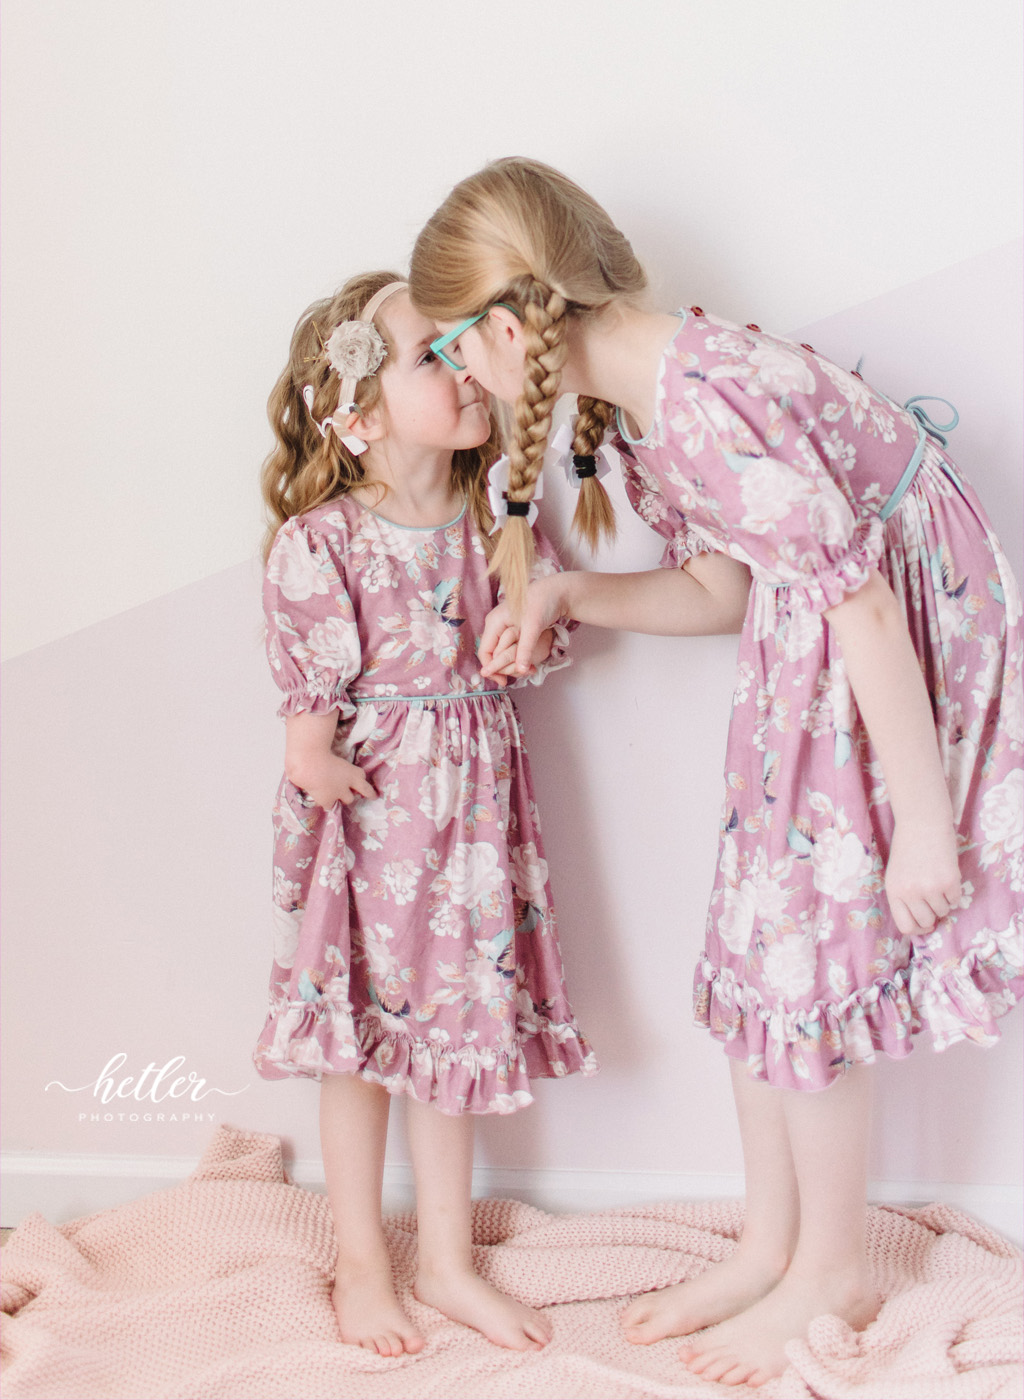 Grand Rapids children photography with boutique clothing, Eliza Grace Clothing